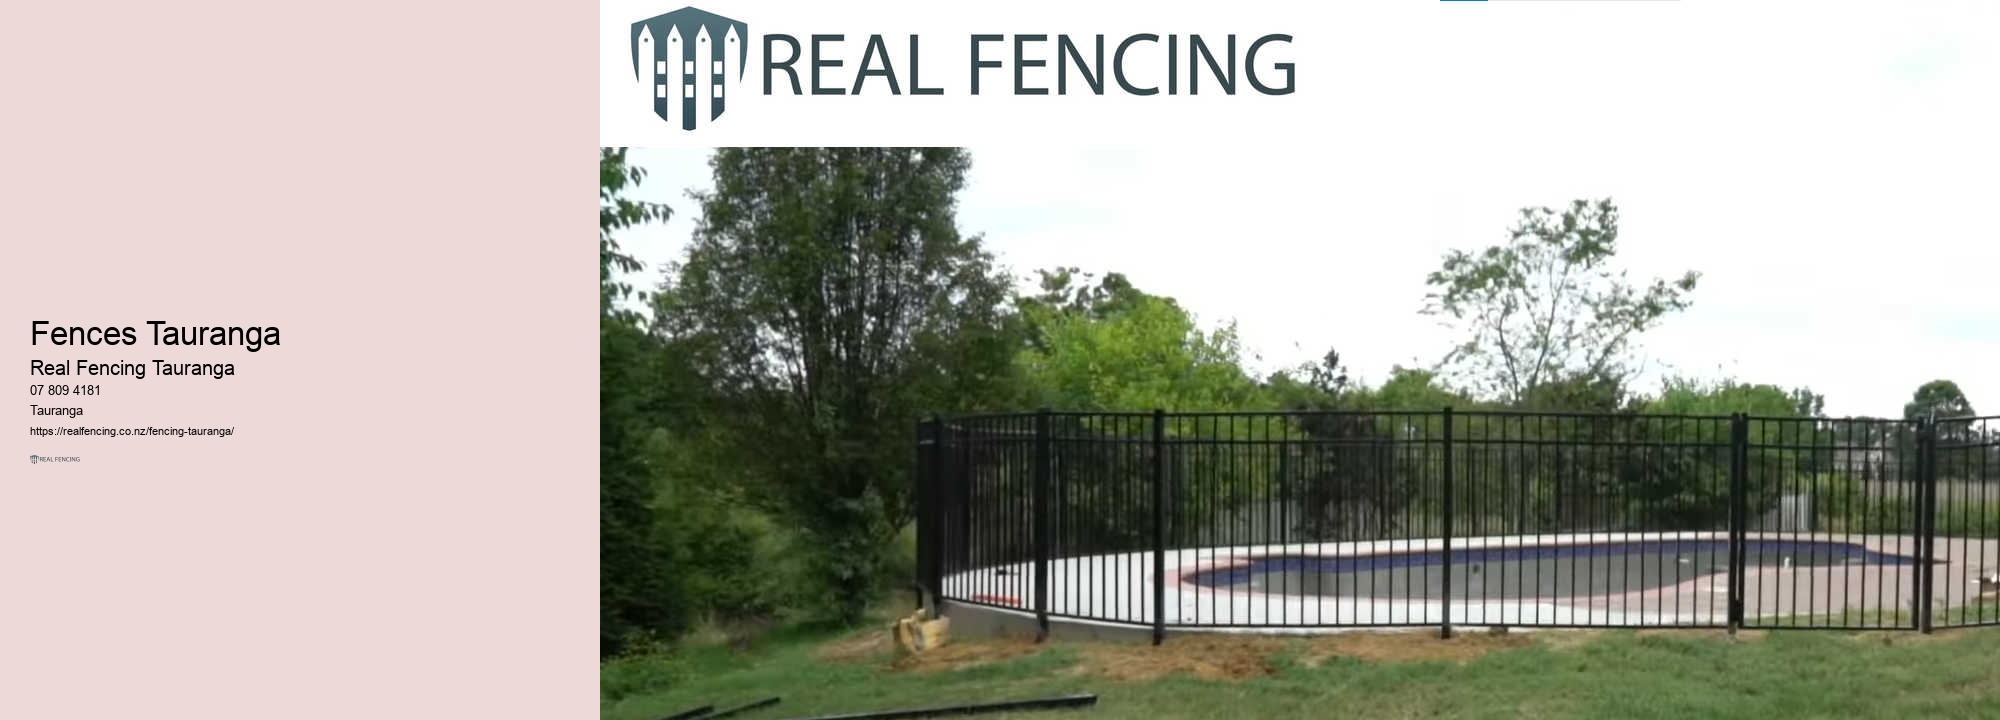 Pool fencing above ground pool